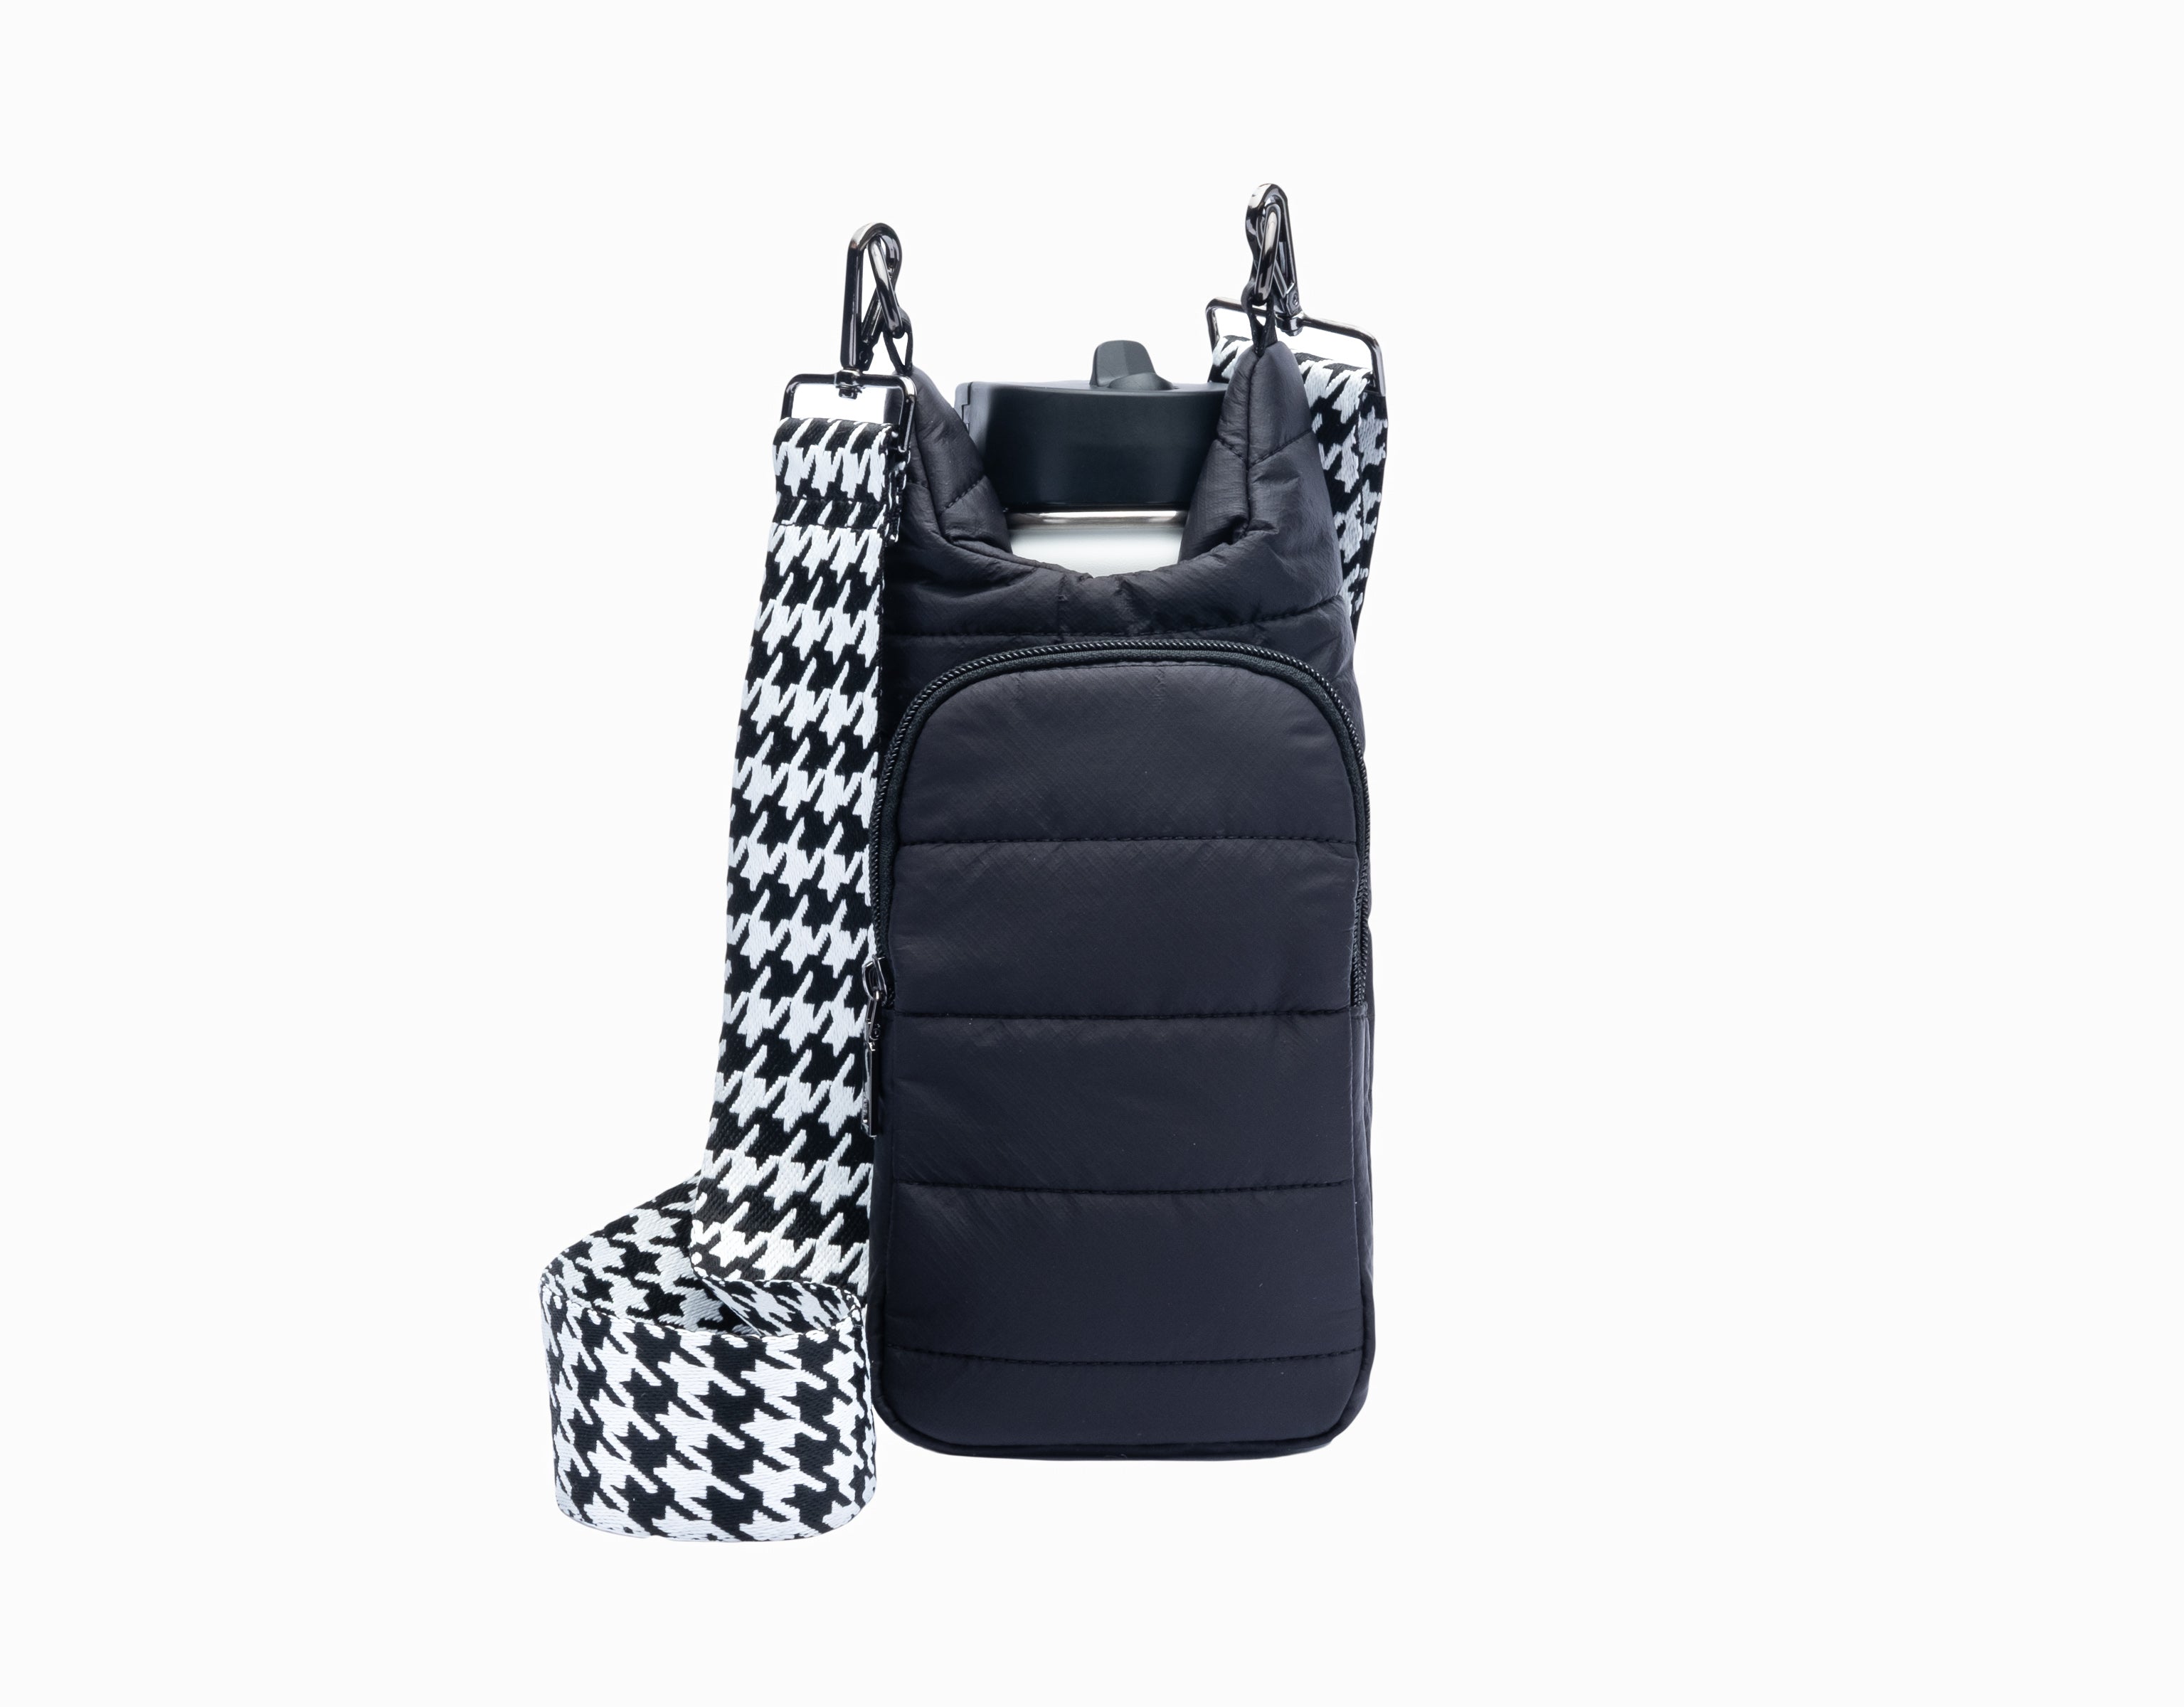 Wholesale Packs (4 or 10) - Black Matte HydroBag with Black/White Houndstooth Strap